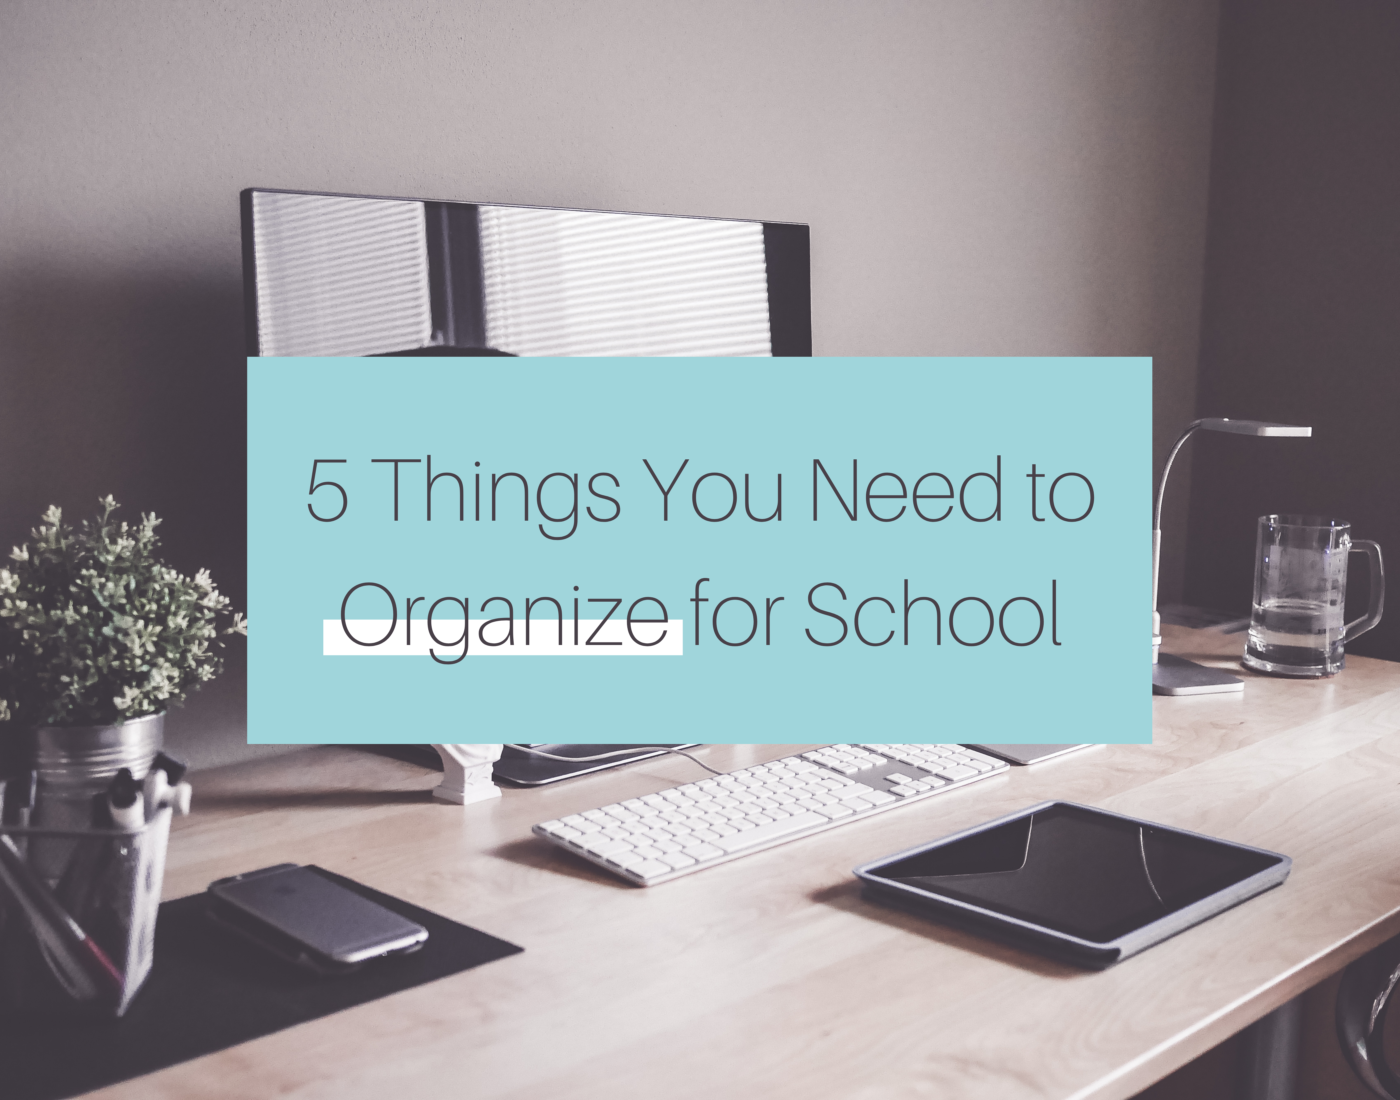 5 Things You Need to Organize for School